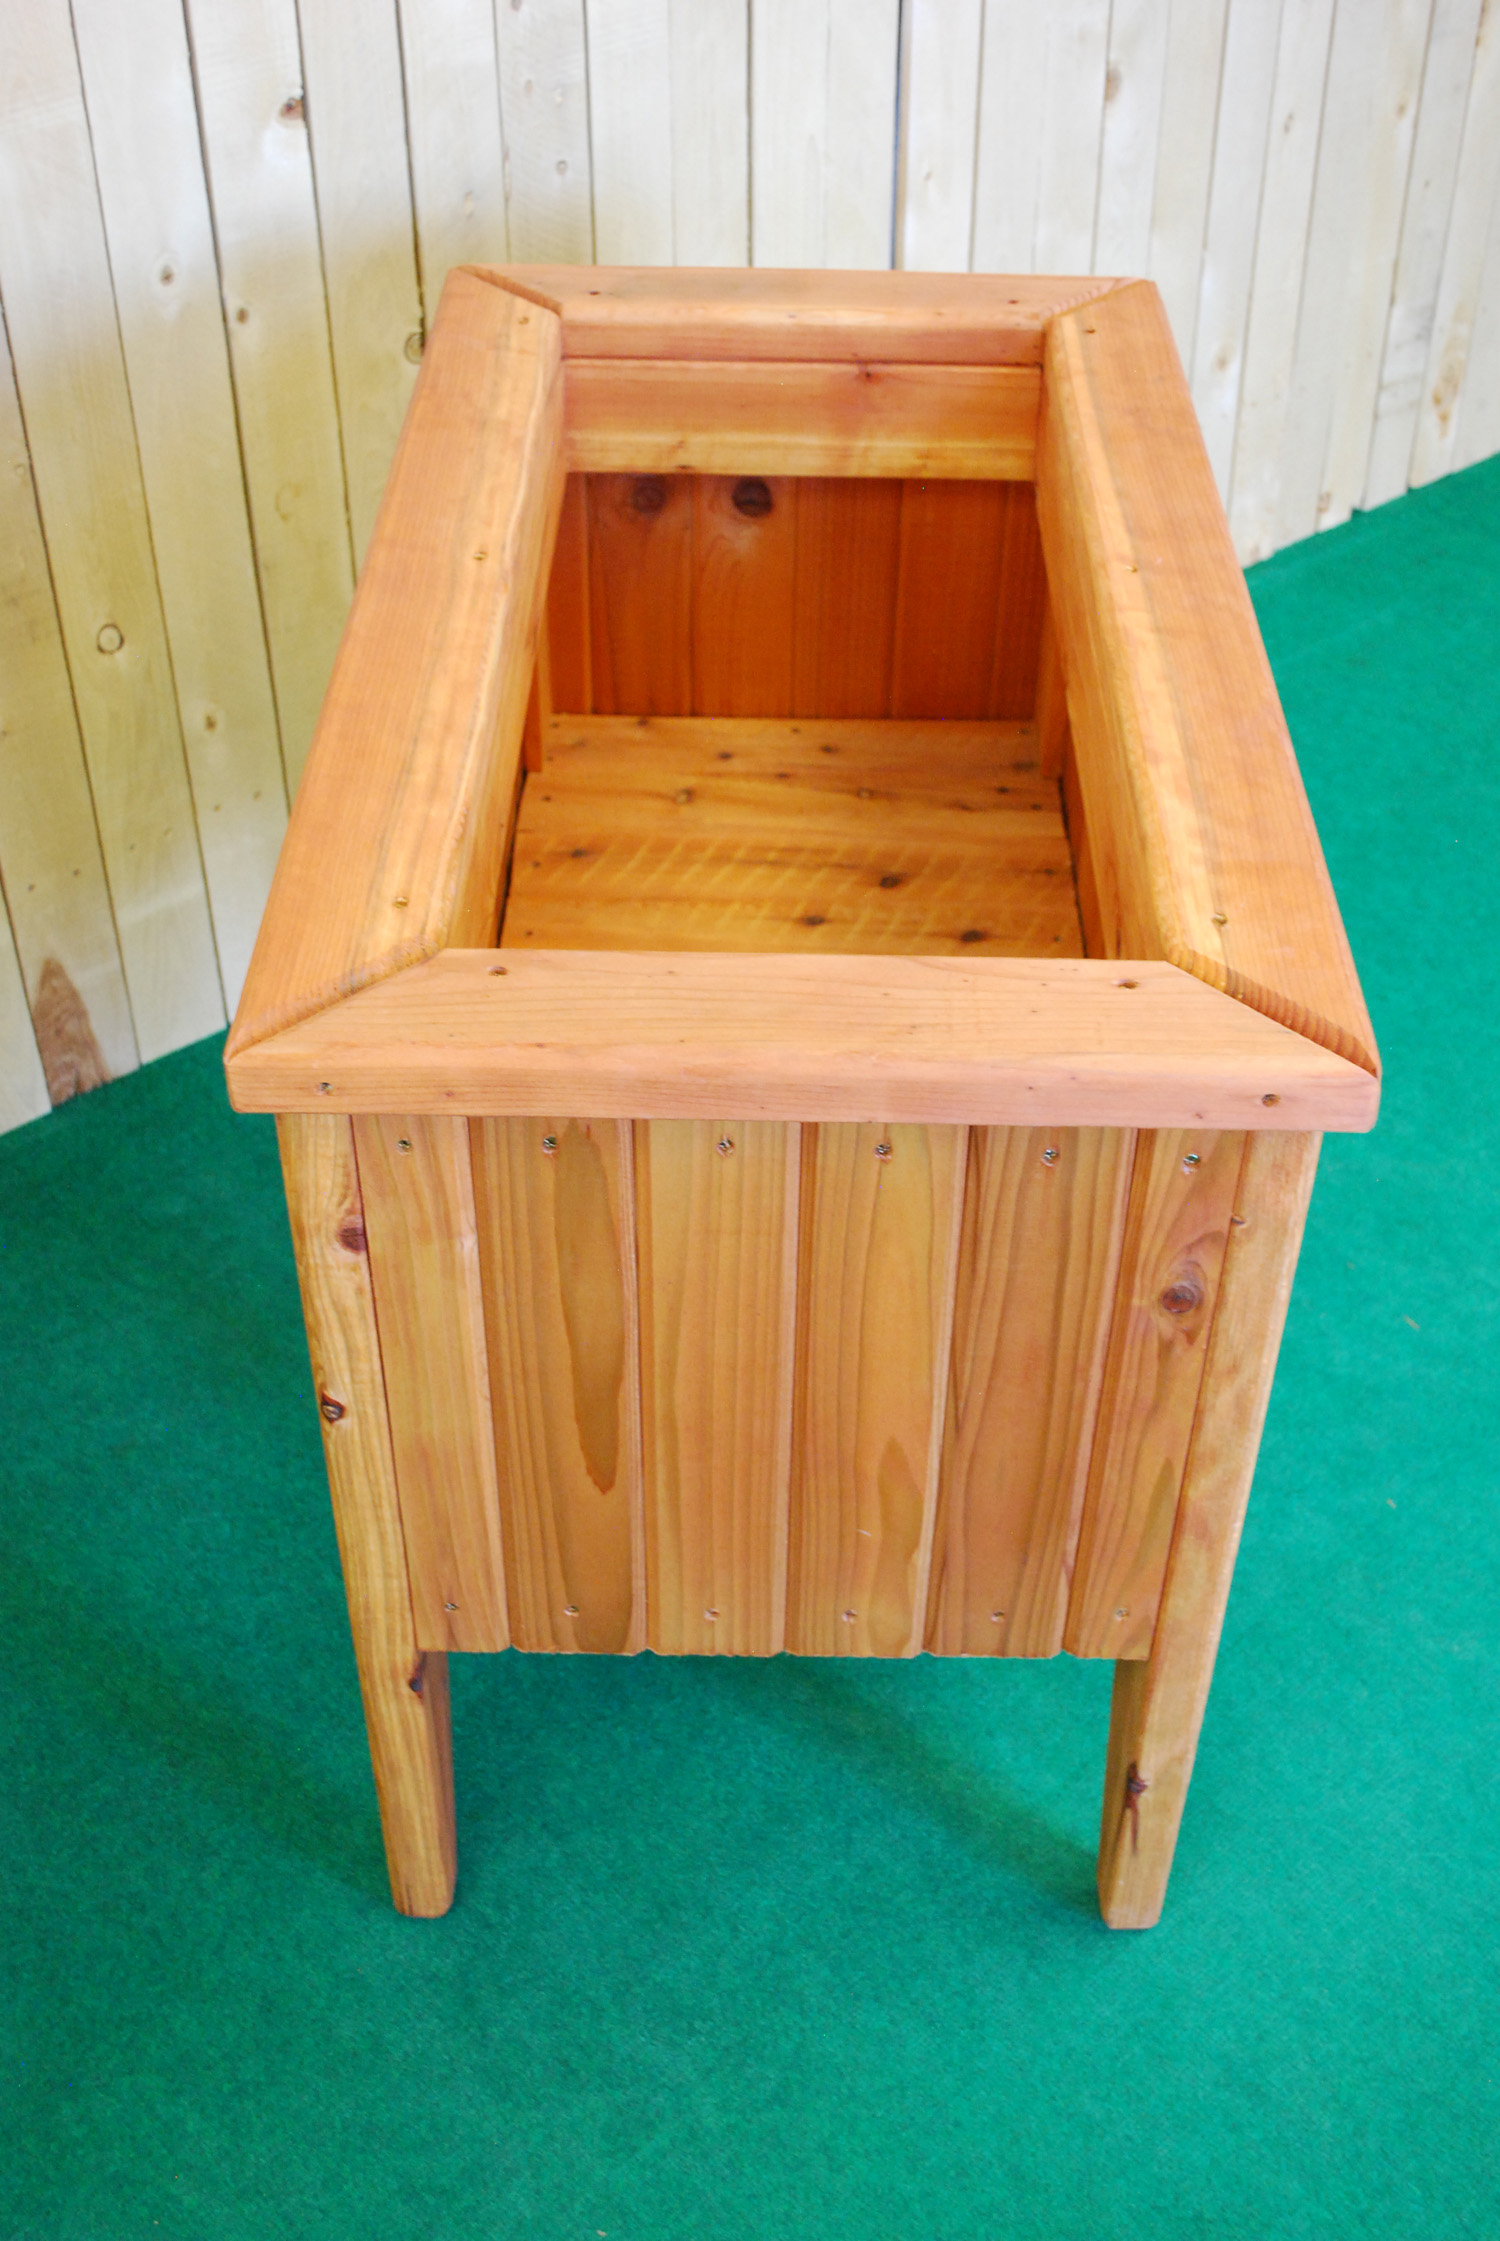 redwood planter with legs